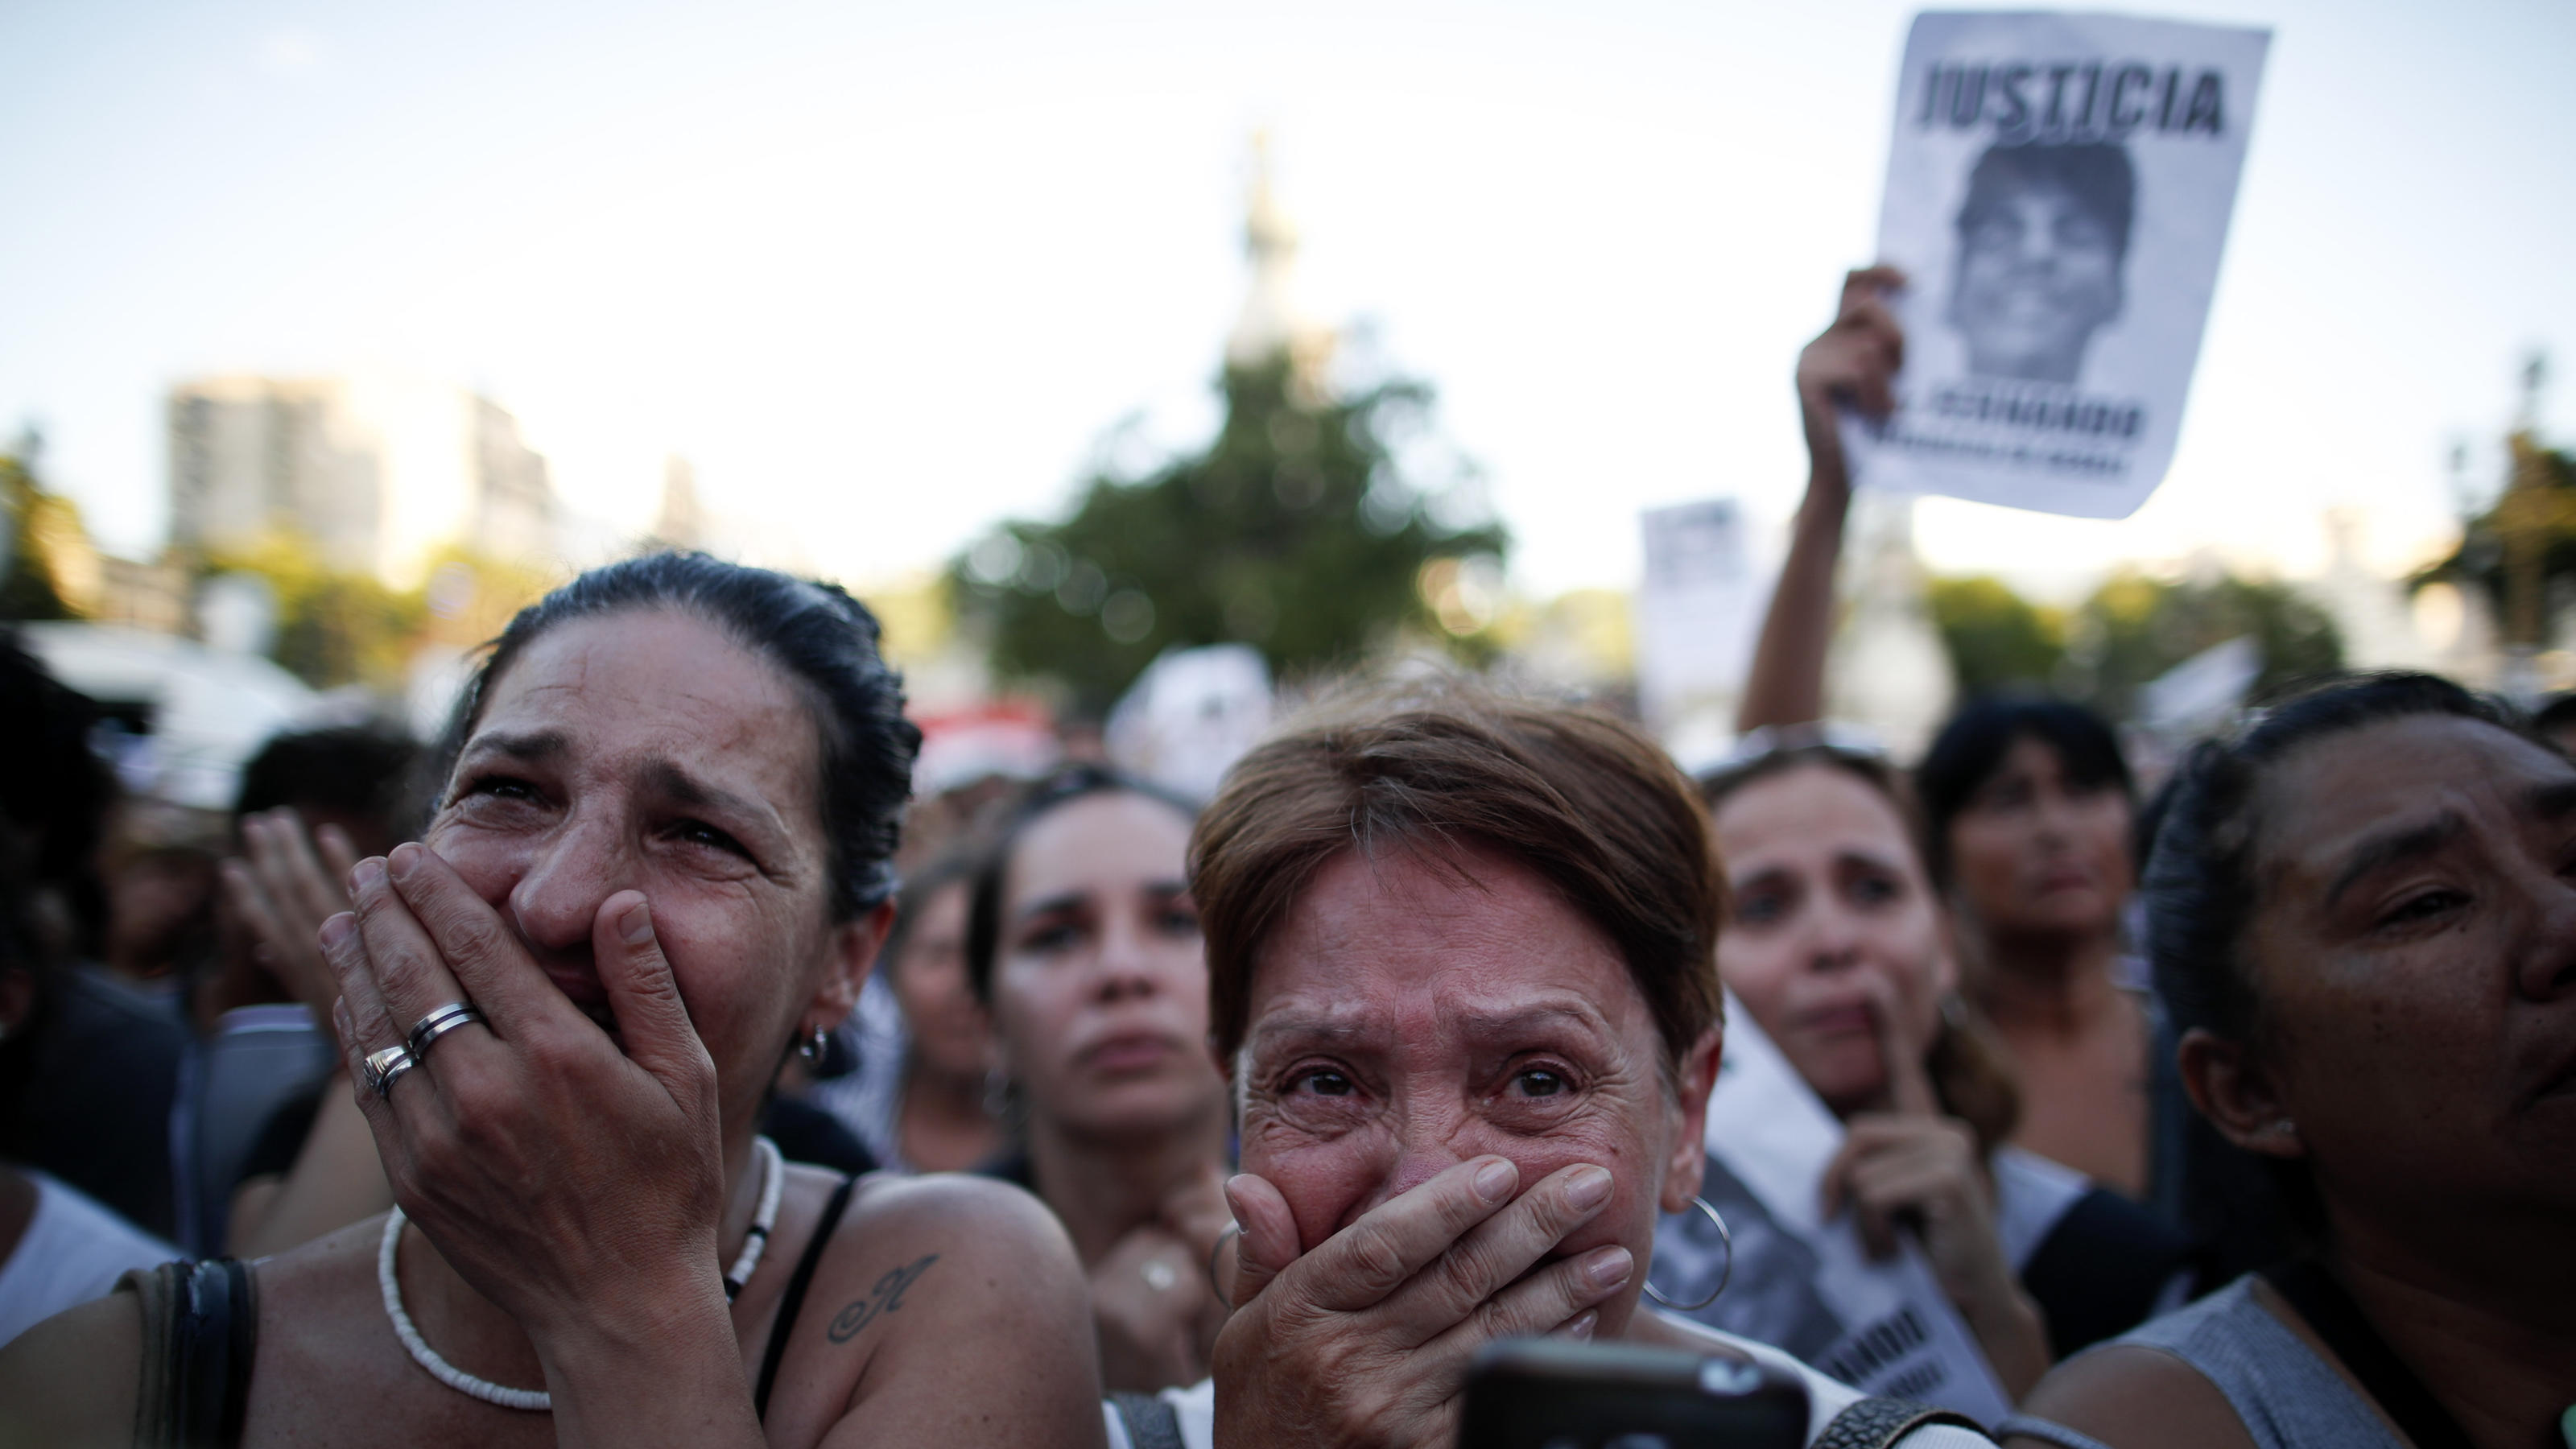 Women cry outside Congress demanding justice for Fernando Baez Sosa during a protest outside Congress one month after the 18-year-old's death, in Buenos Aires, Argentina, Tuesday, Feb. 18, 2020. According to an attorney on the case, Baez Sosa was bea